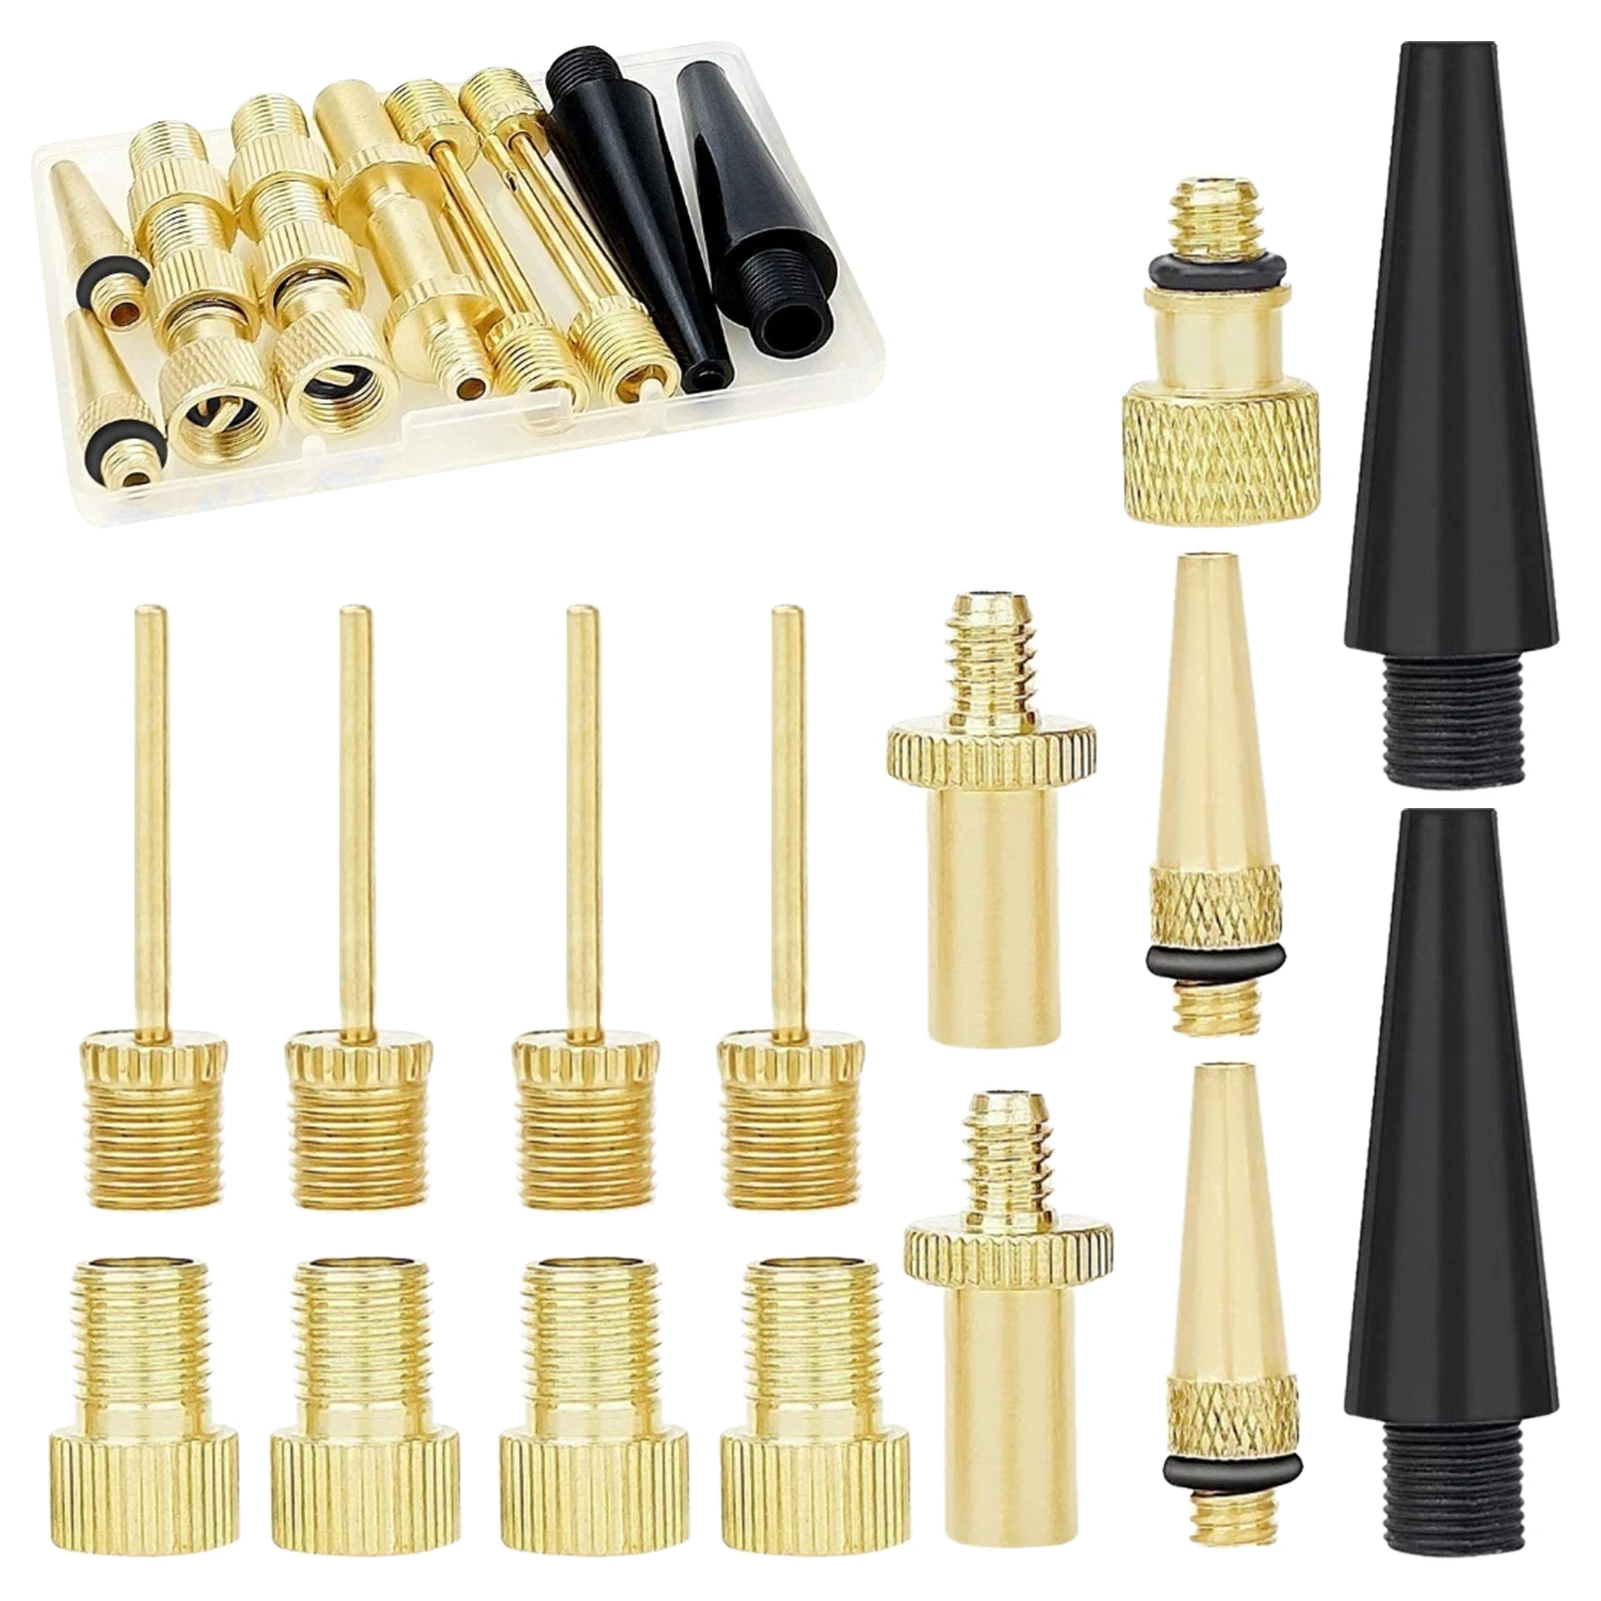 

16pcs Ball Needles Air Mattresses Swimming Rims Cone Adapters With Screw Thread Balls Copper Covers All Needs Bike Valve Adapter